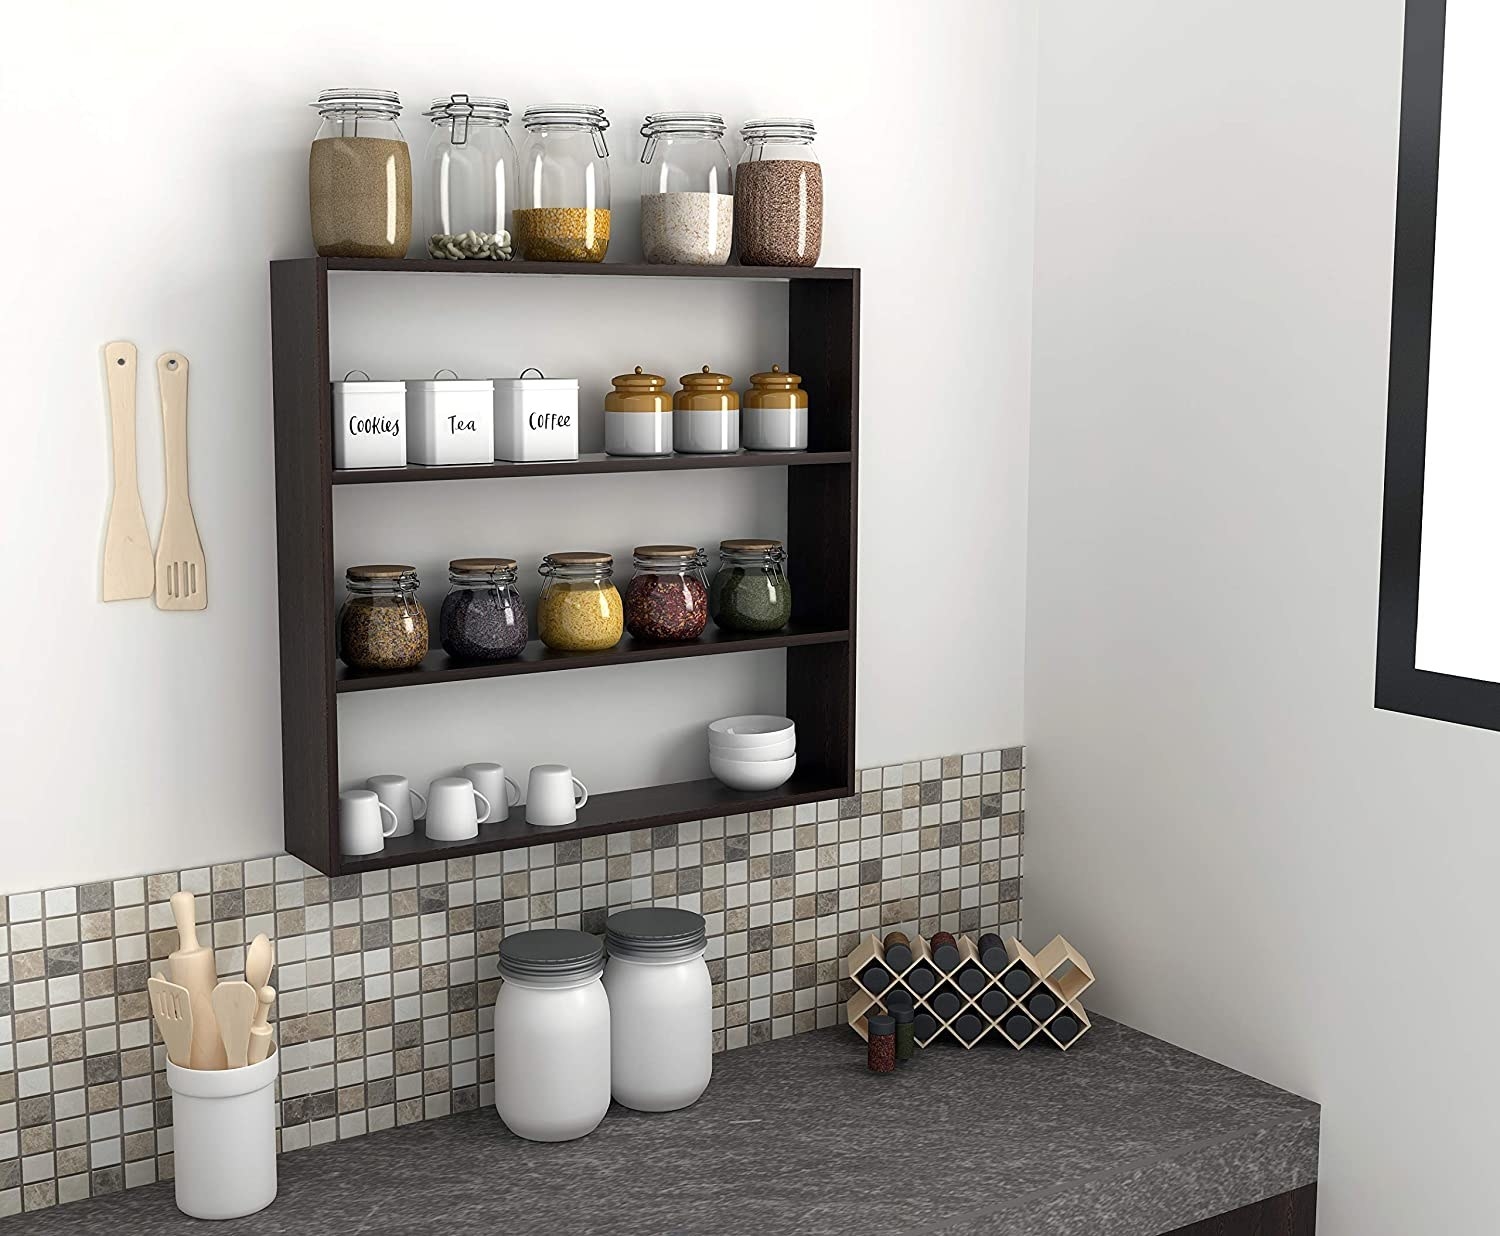 A wall rack with spice jars and cups and plates 